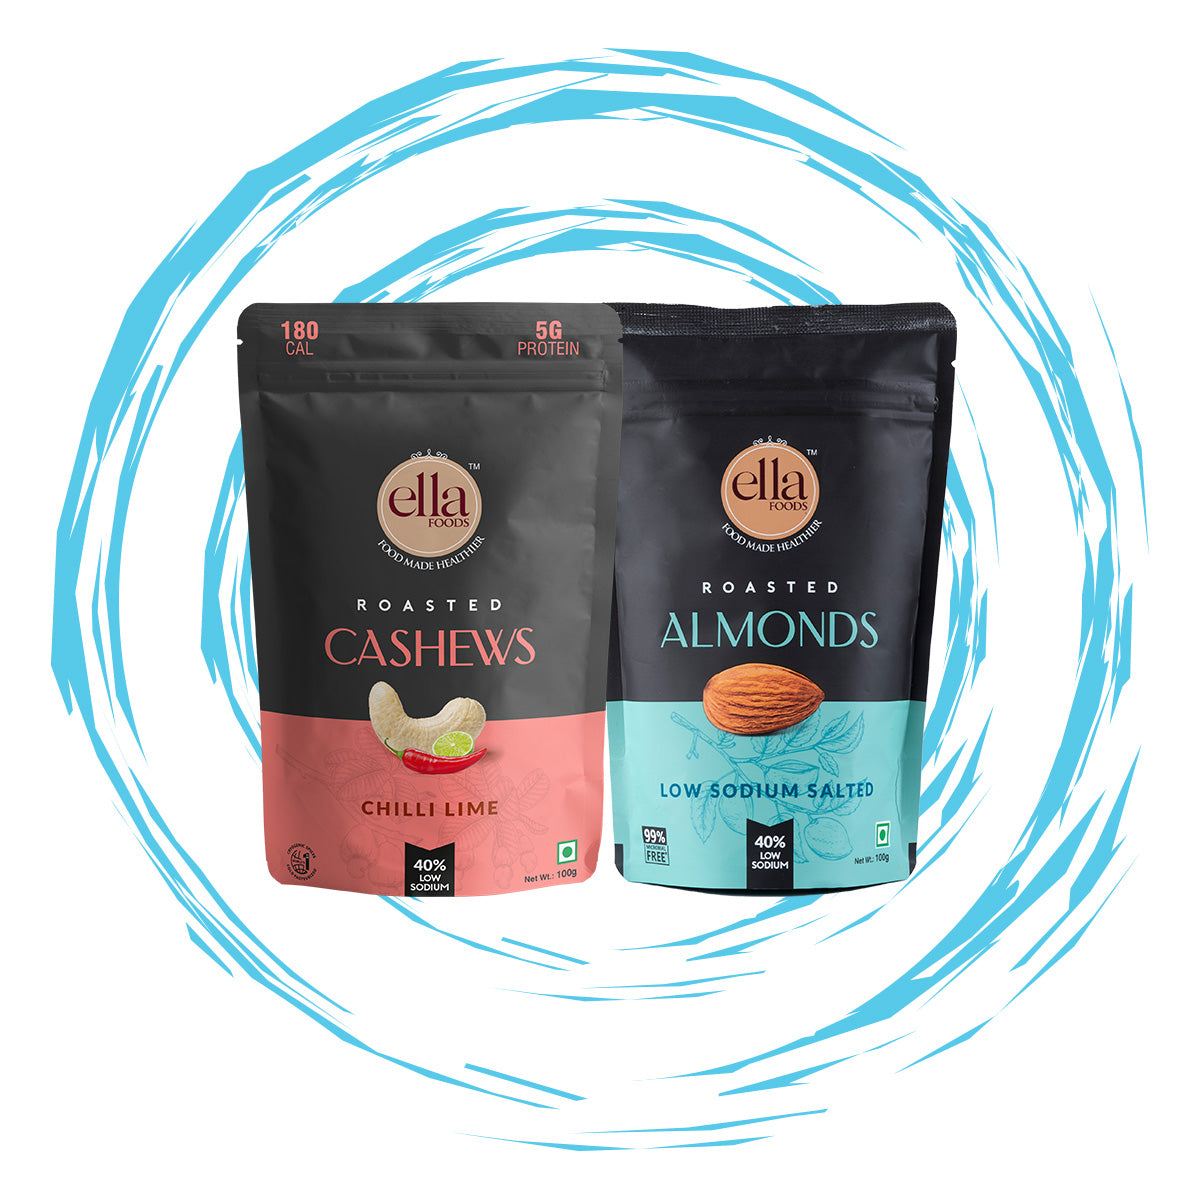 Chilli Lime Cashews & Salted Almonds Combo - Pack of 2 - 100g Each